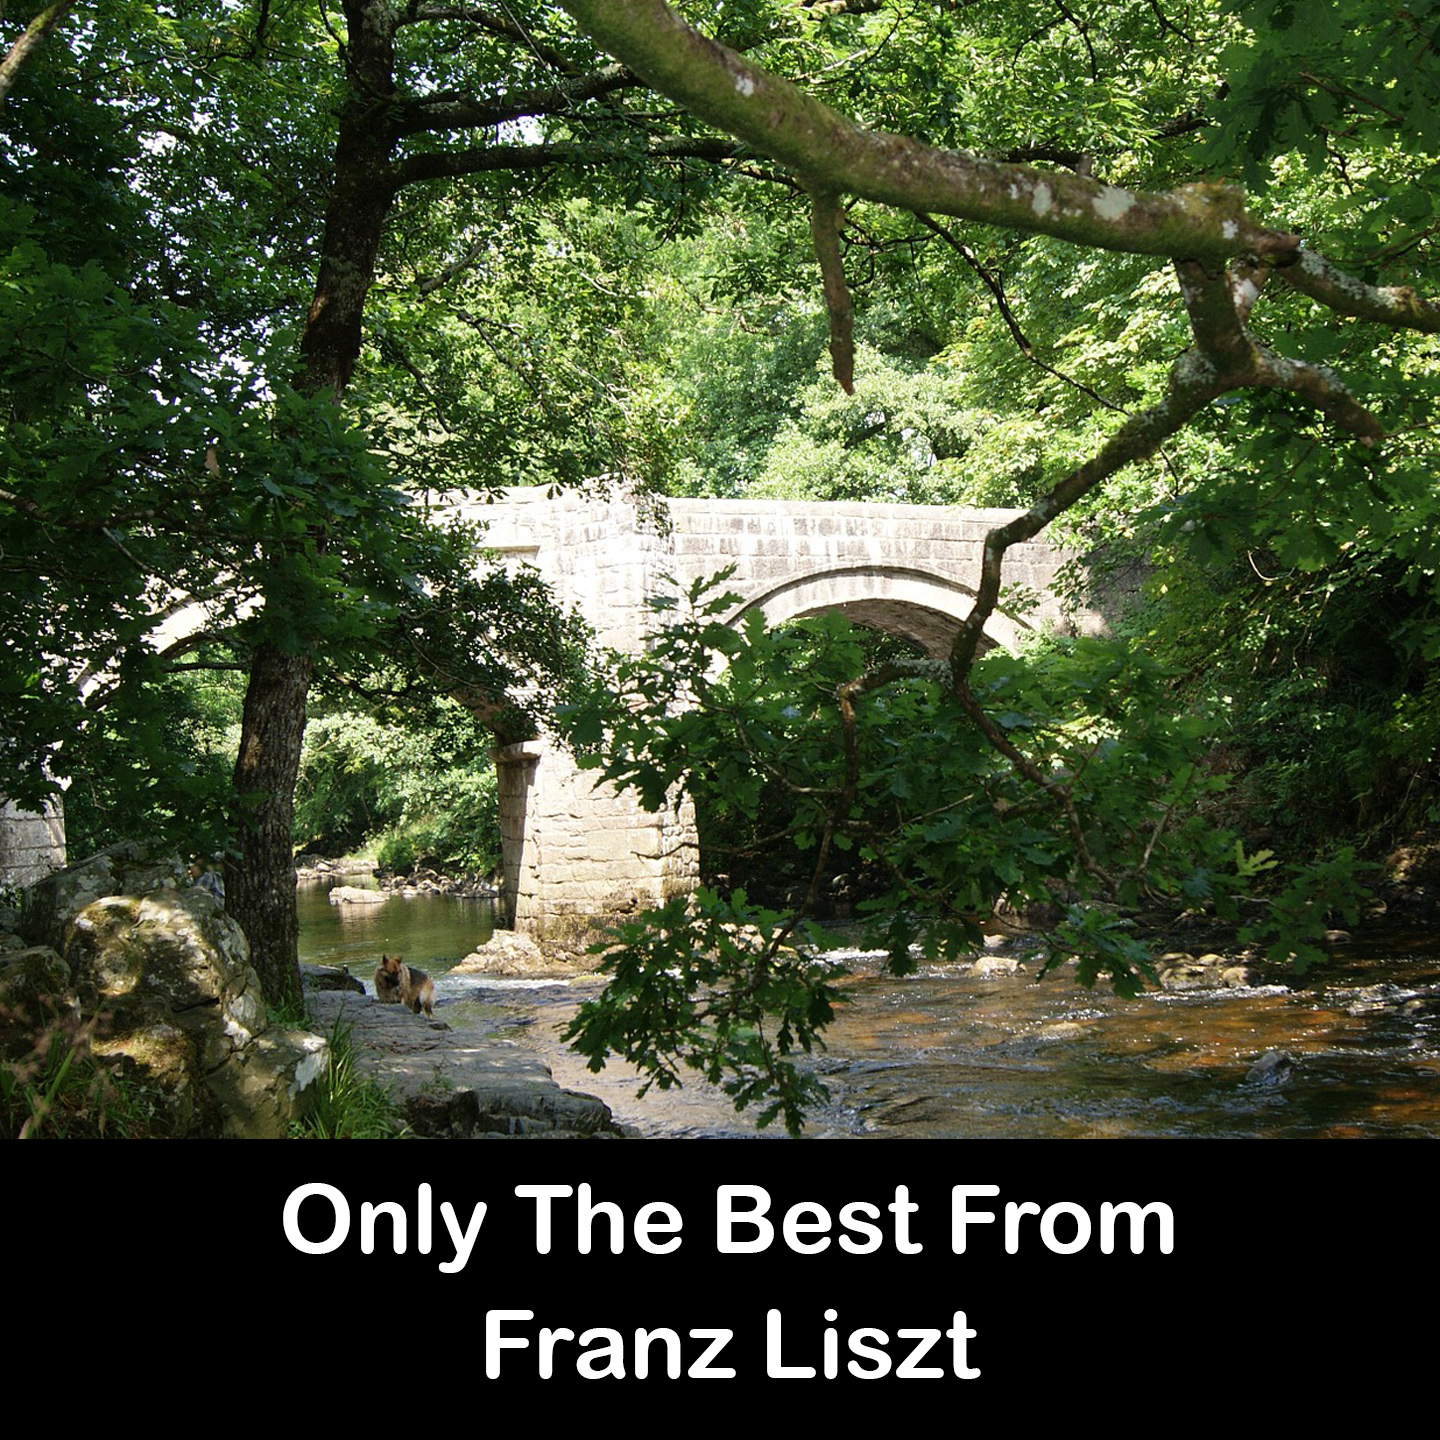 Only The Best From Franz Liszt